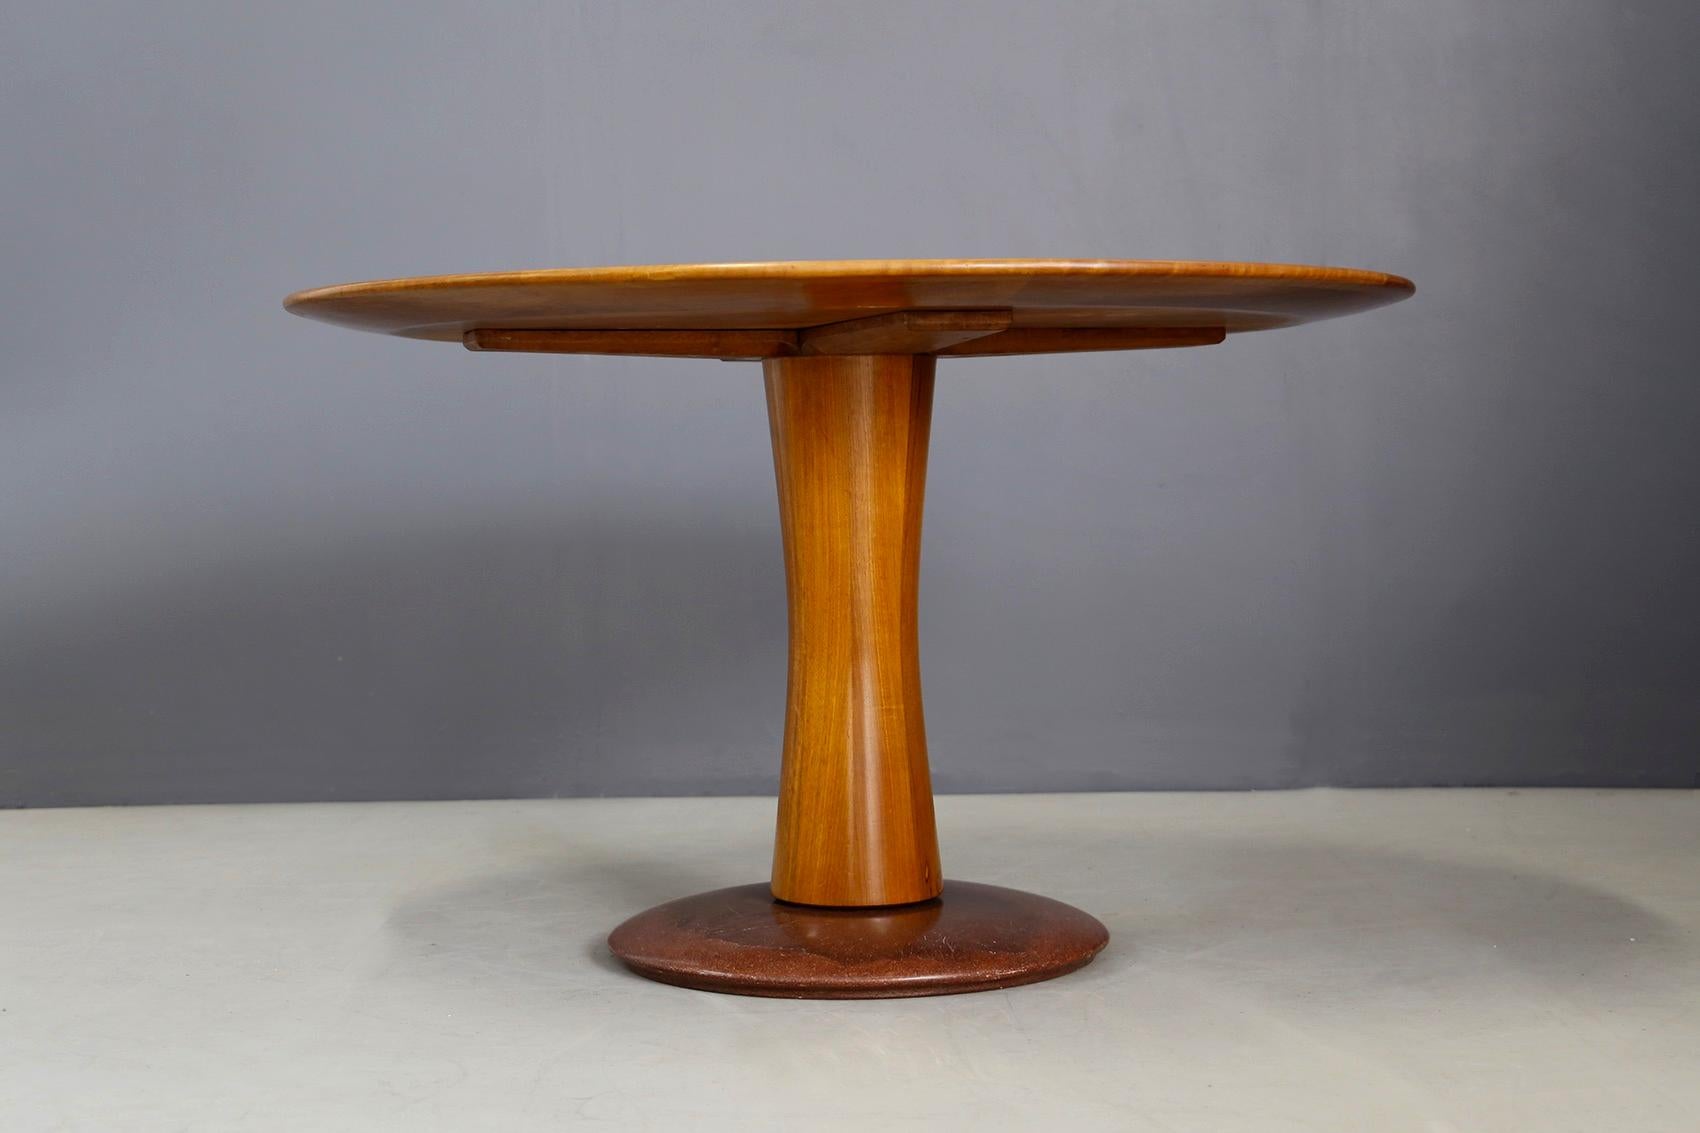 Elegant coffee table by Paolo Buffa. Table with circular top. Execution Serafino Arrighi, Cantù of the late 1940s, early 1950s. The top is made of wood, the pedestal shaft is made of walnut wood, base in red marble.
Accompanied by a declaration of